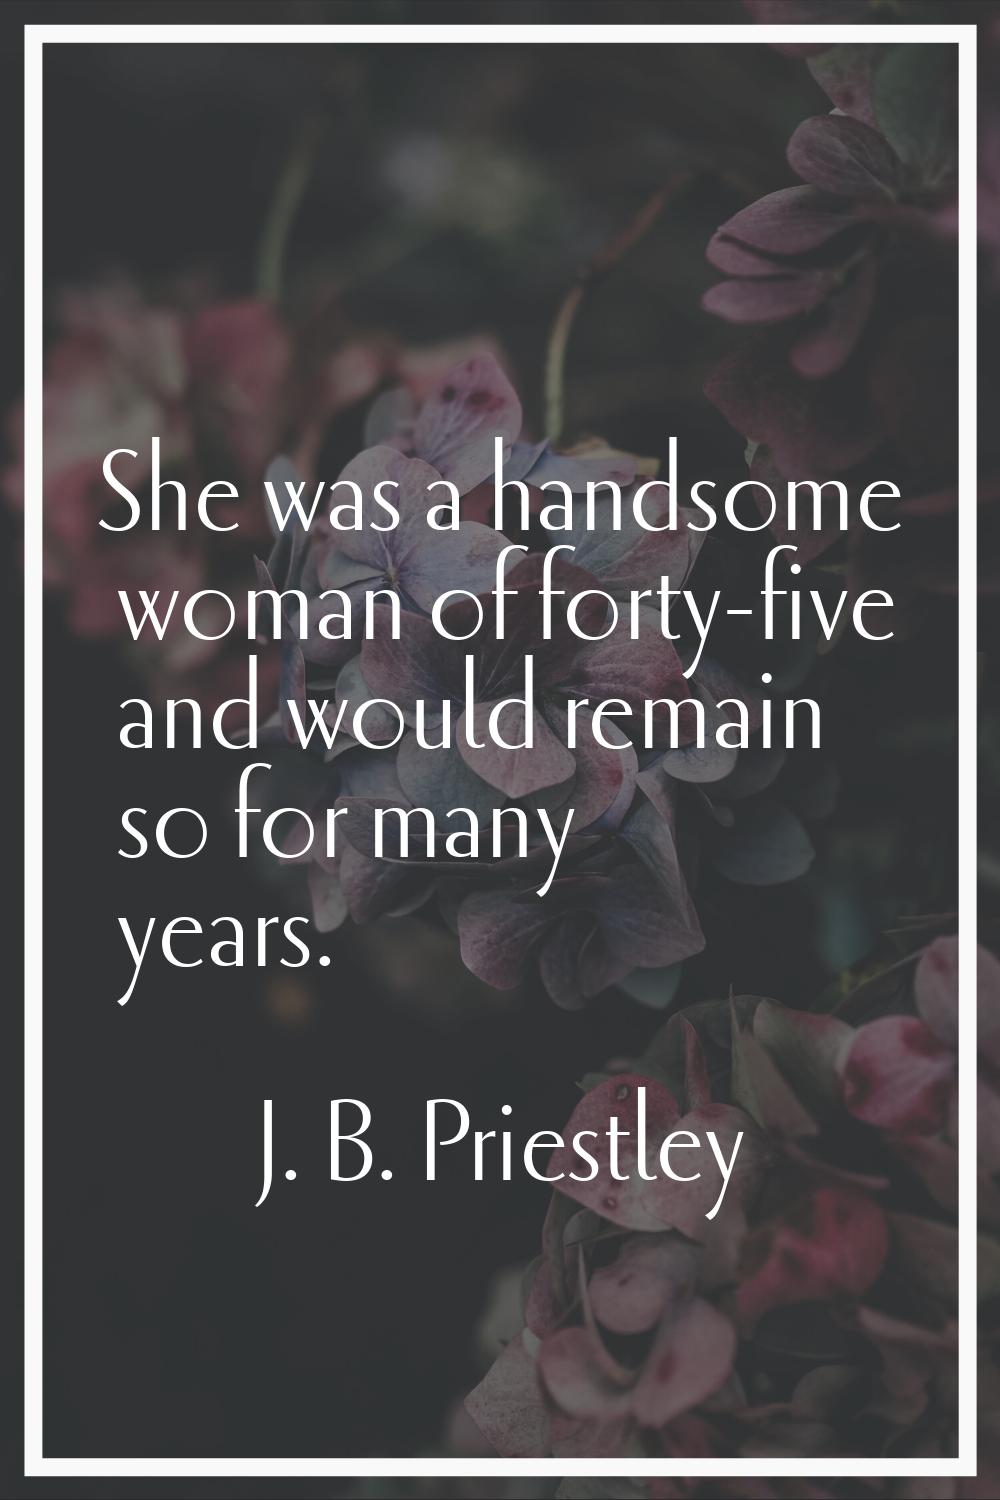 She was a handsome woman of forty-five and would remain so for many years.